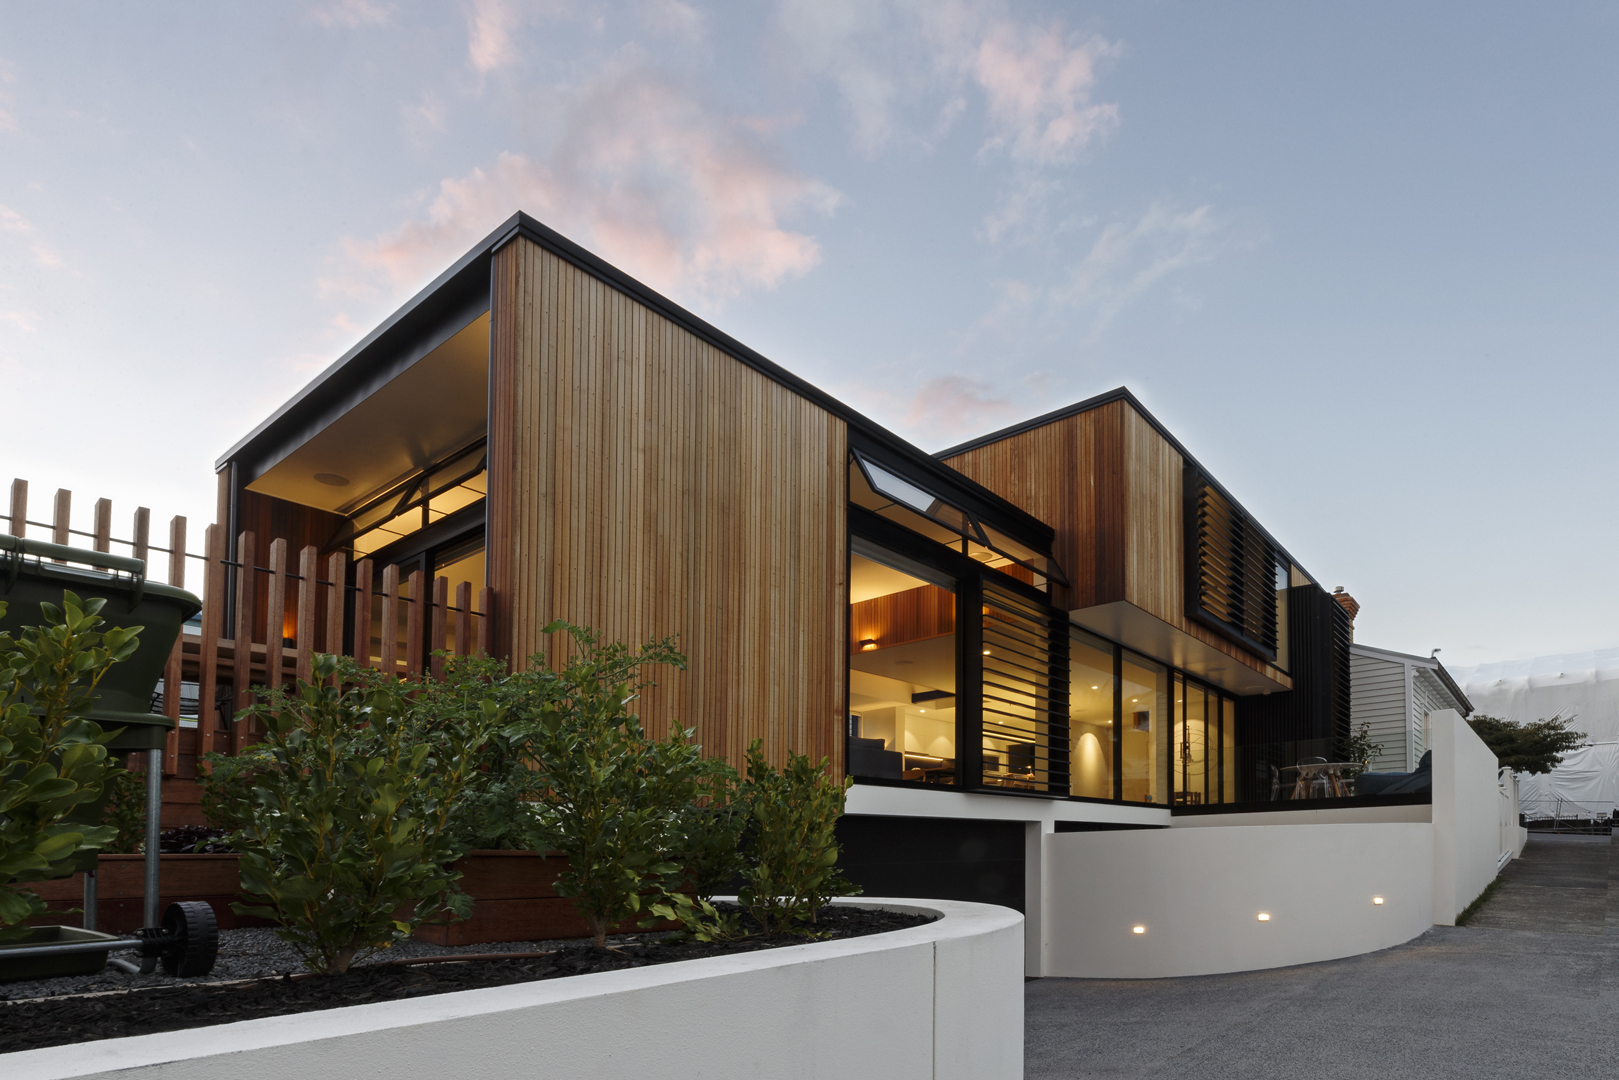 Lawson House designed by Matz Architects